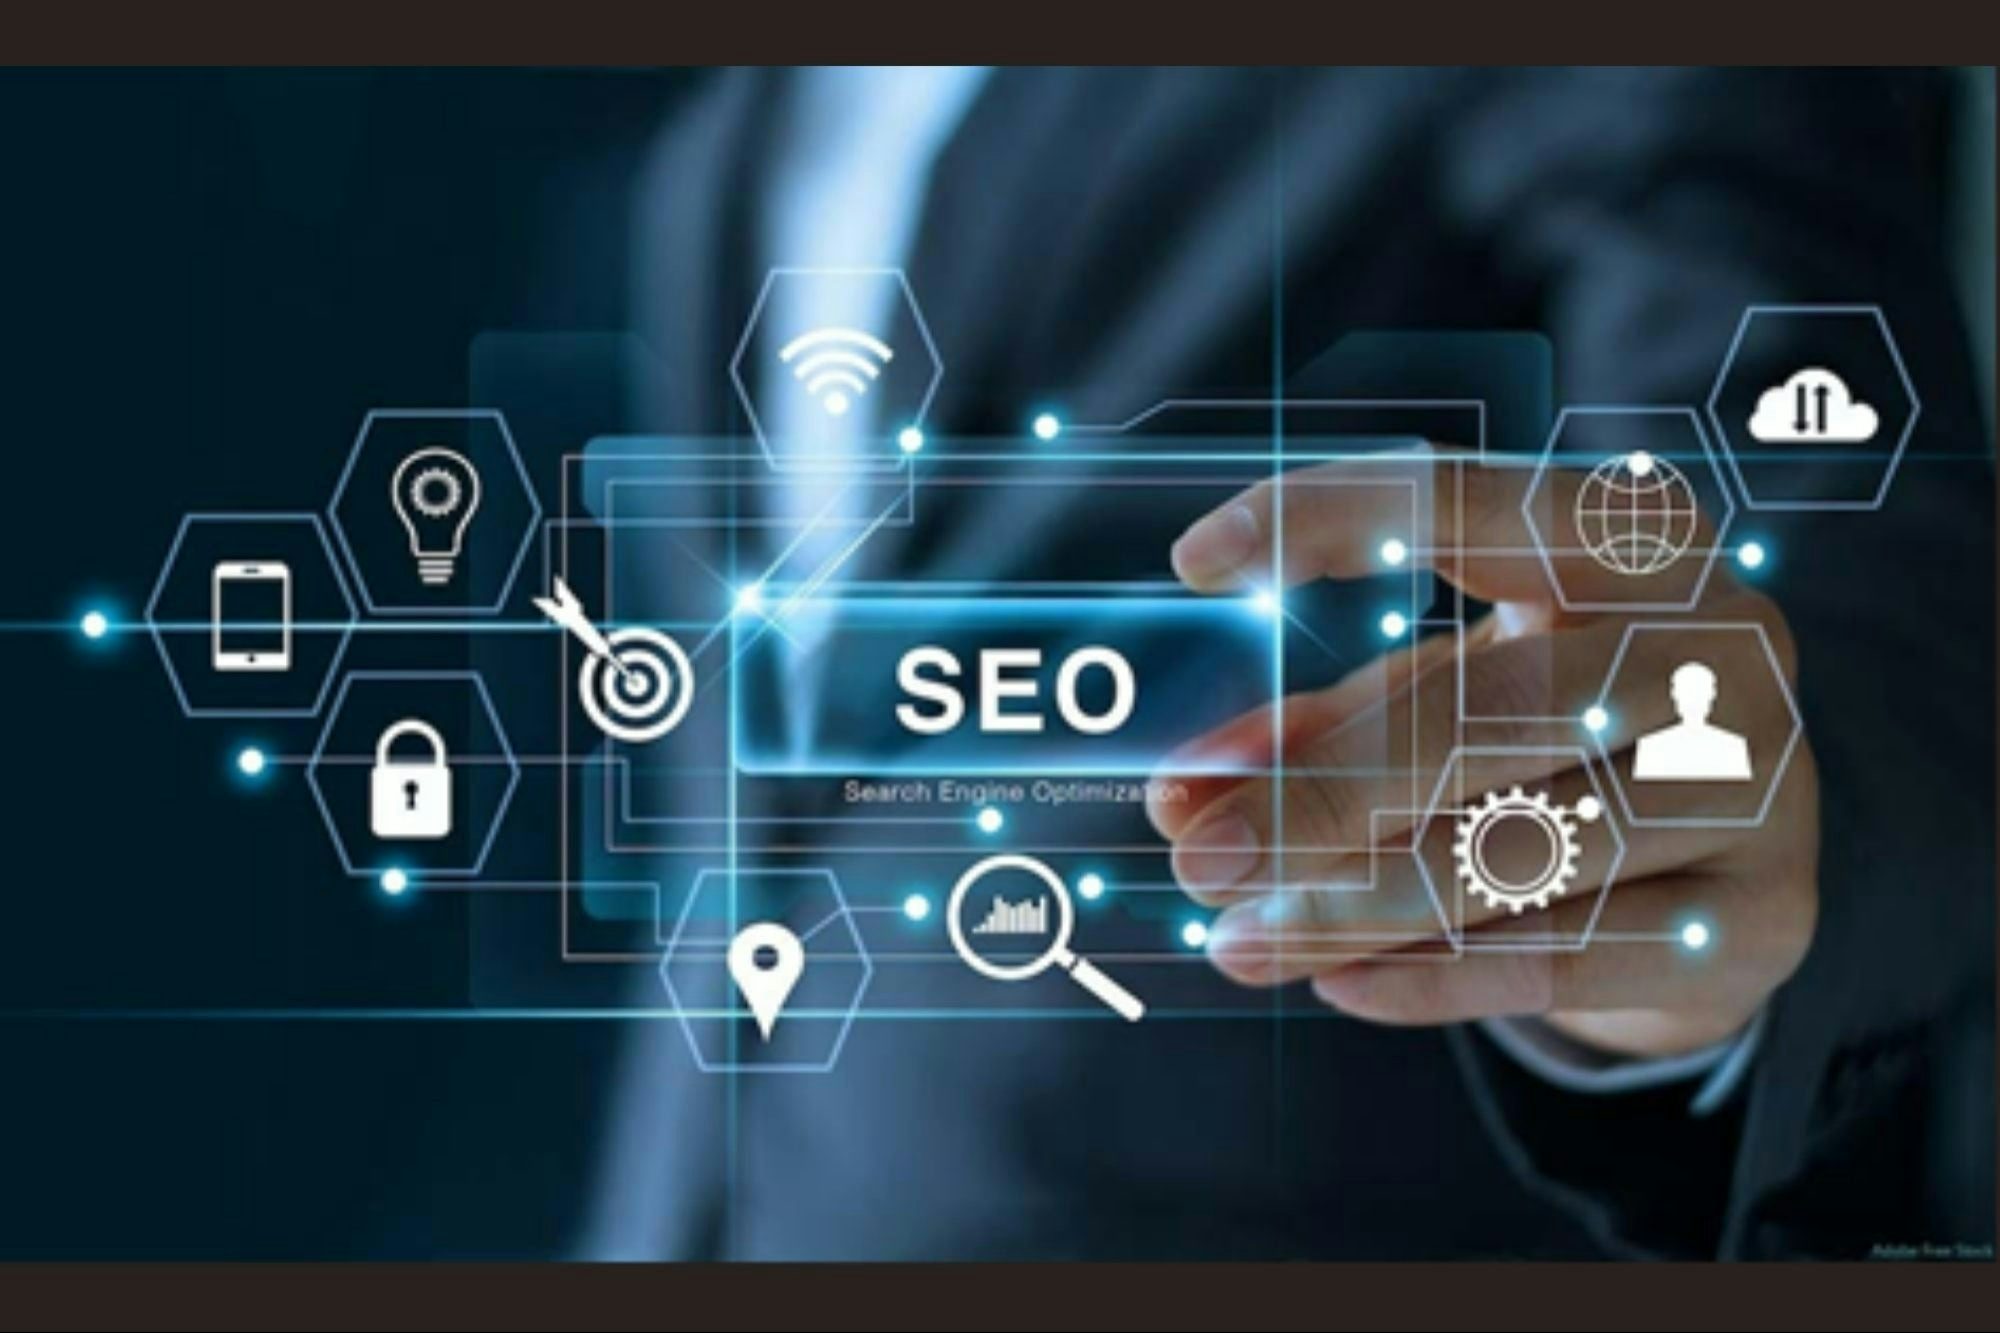 SEO is the key to online success